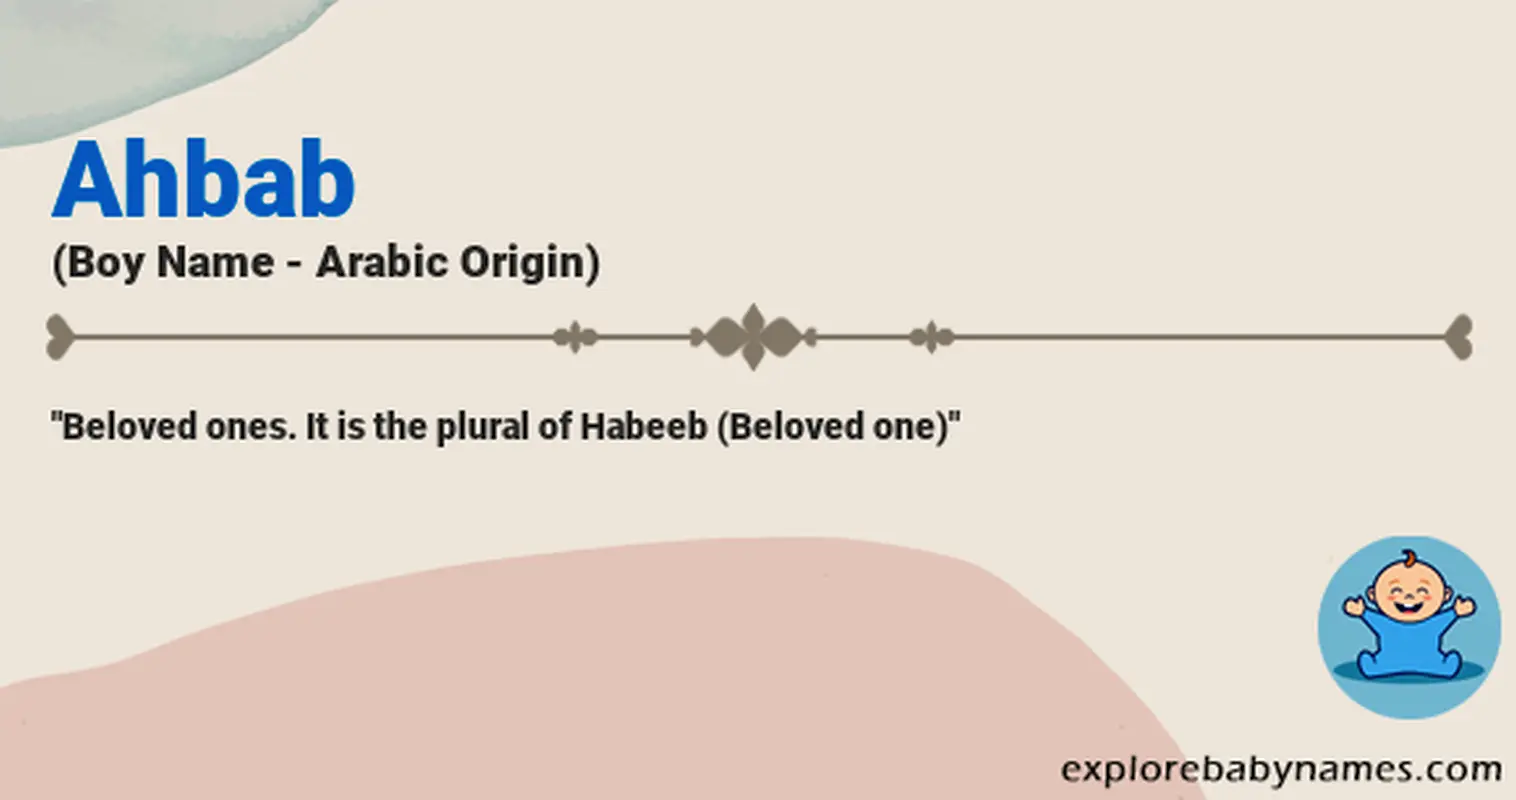 Meaning of Ahbab